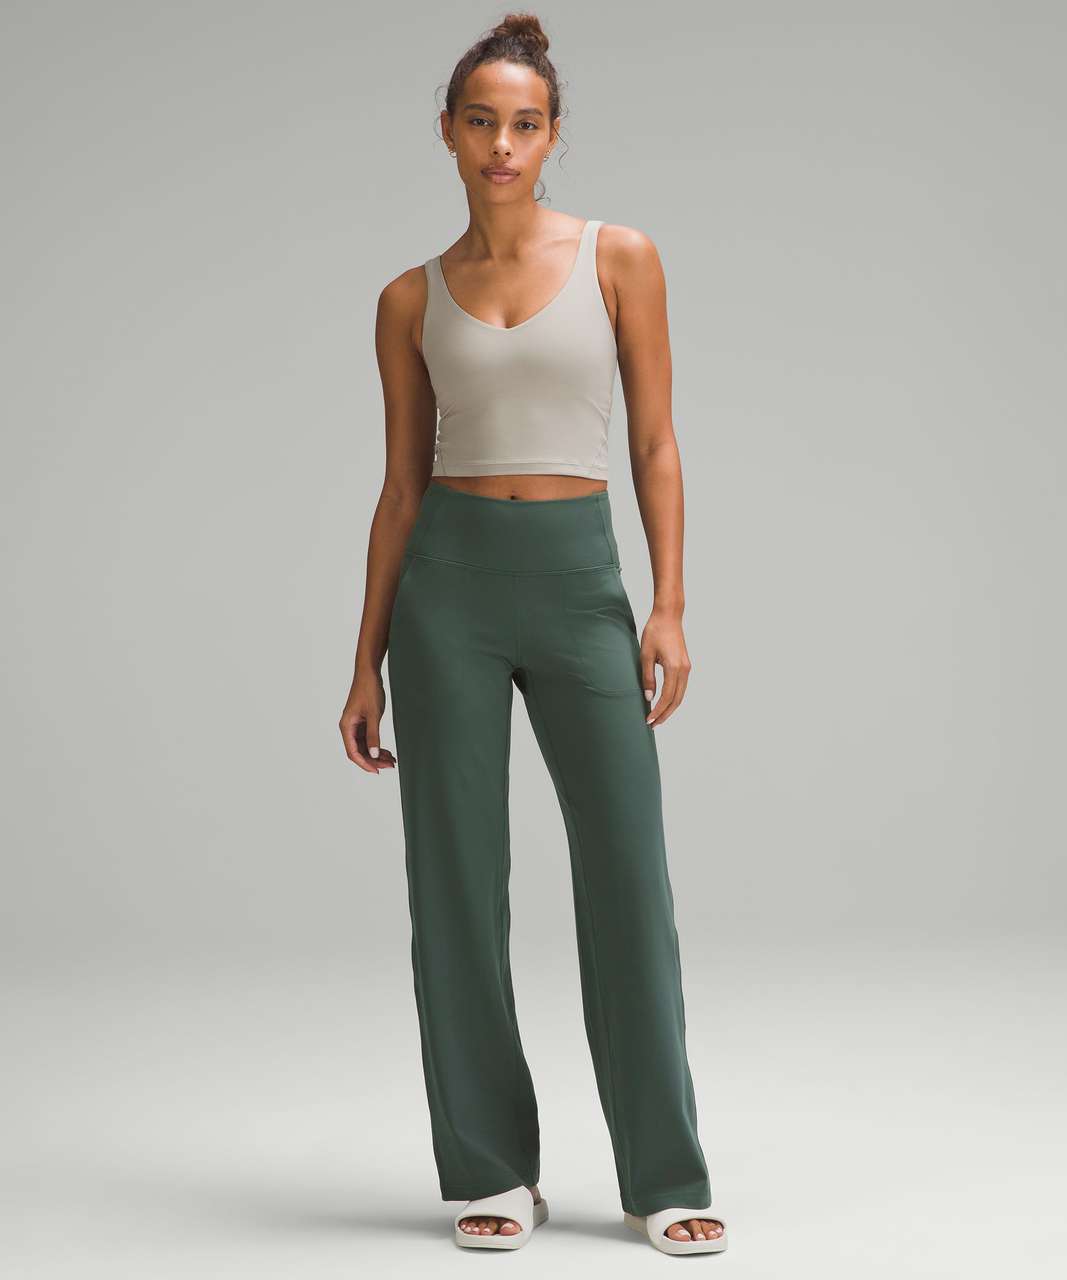 Lululemon Align High Rise Wide Leg Pant Short Size 10 - $50 (60% Off  Retail) - From nat